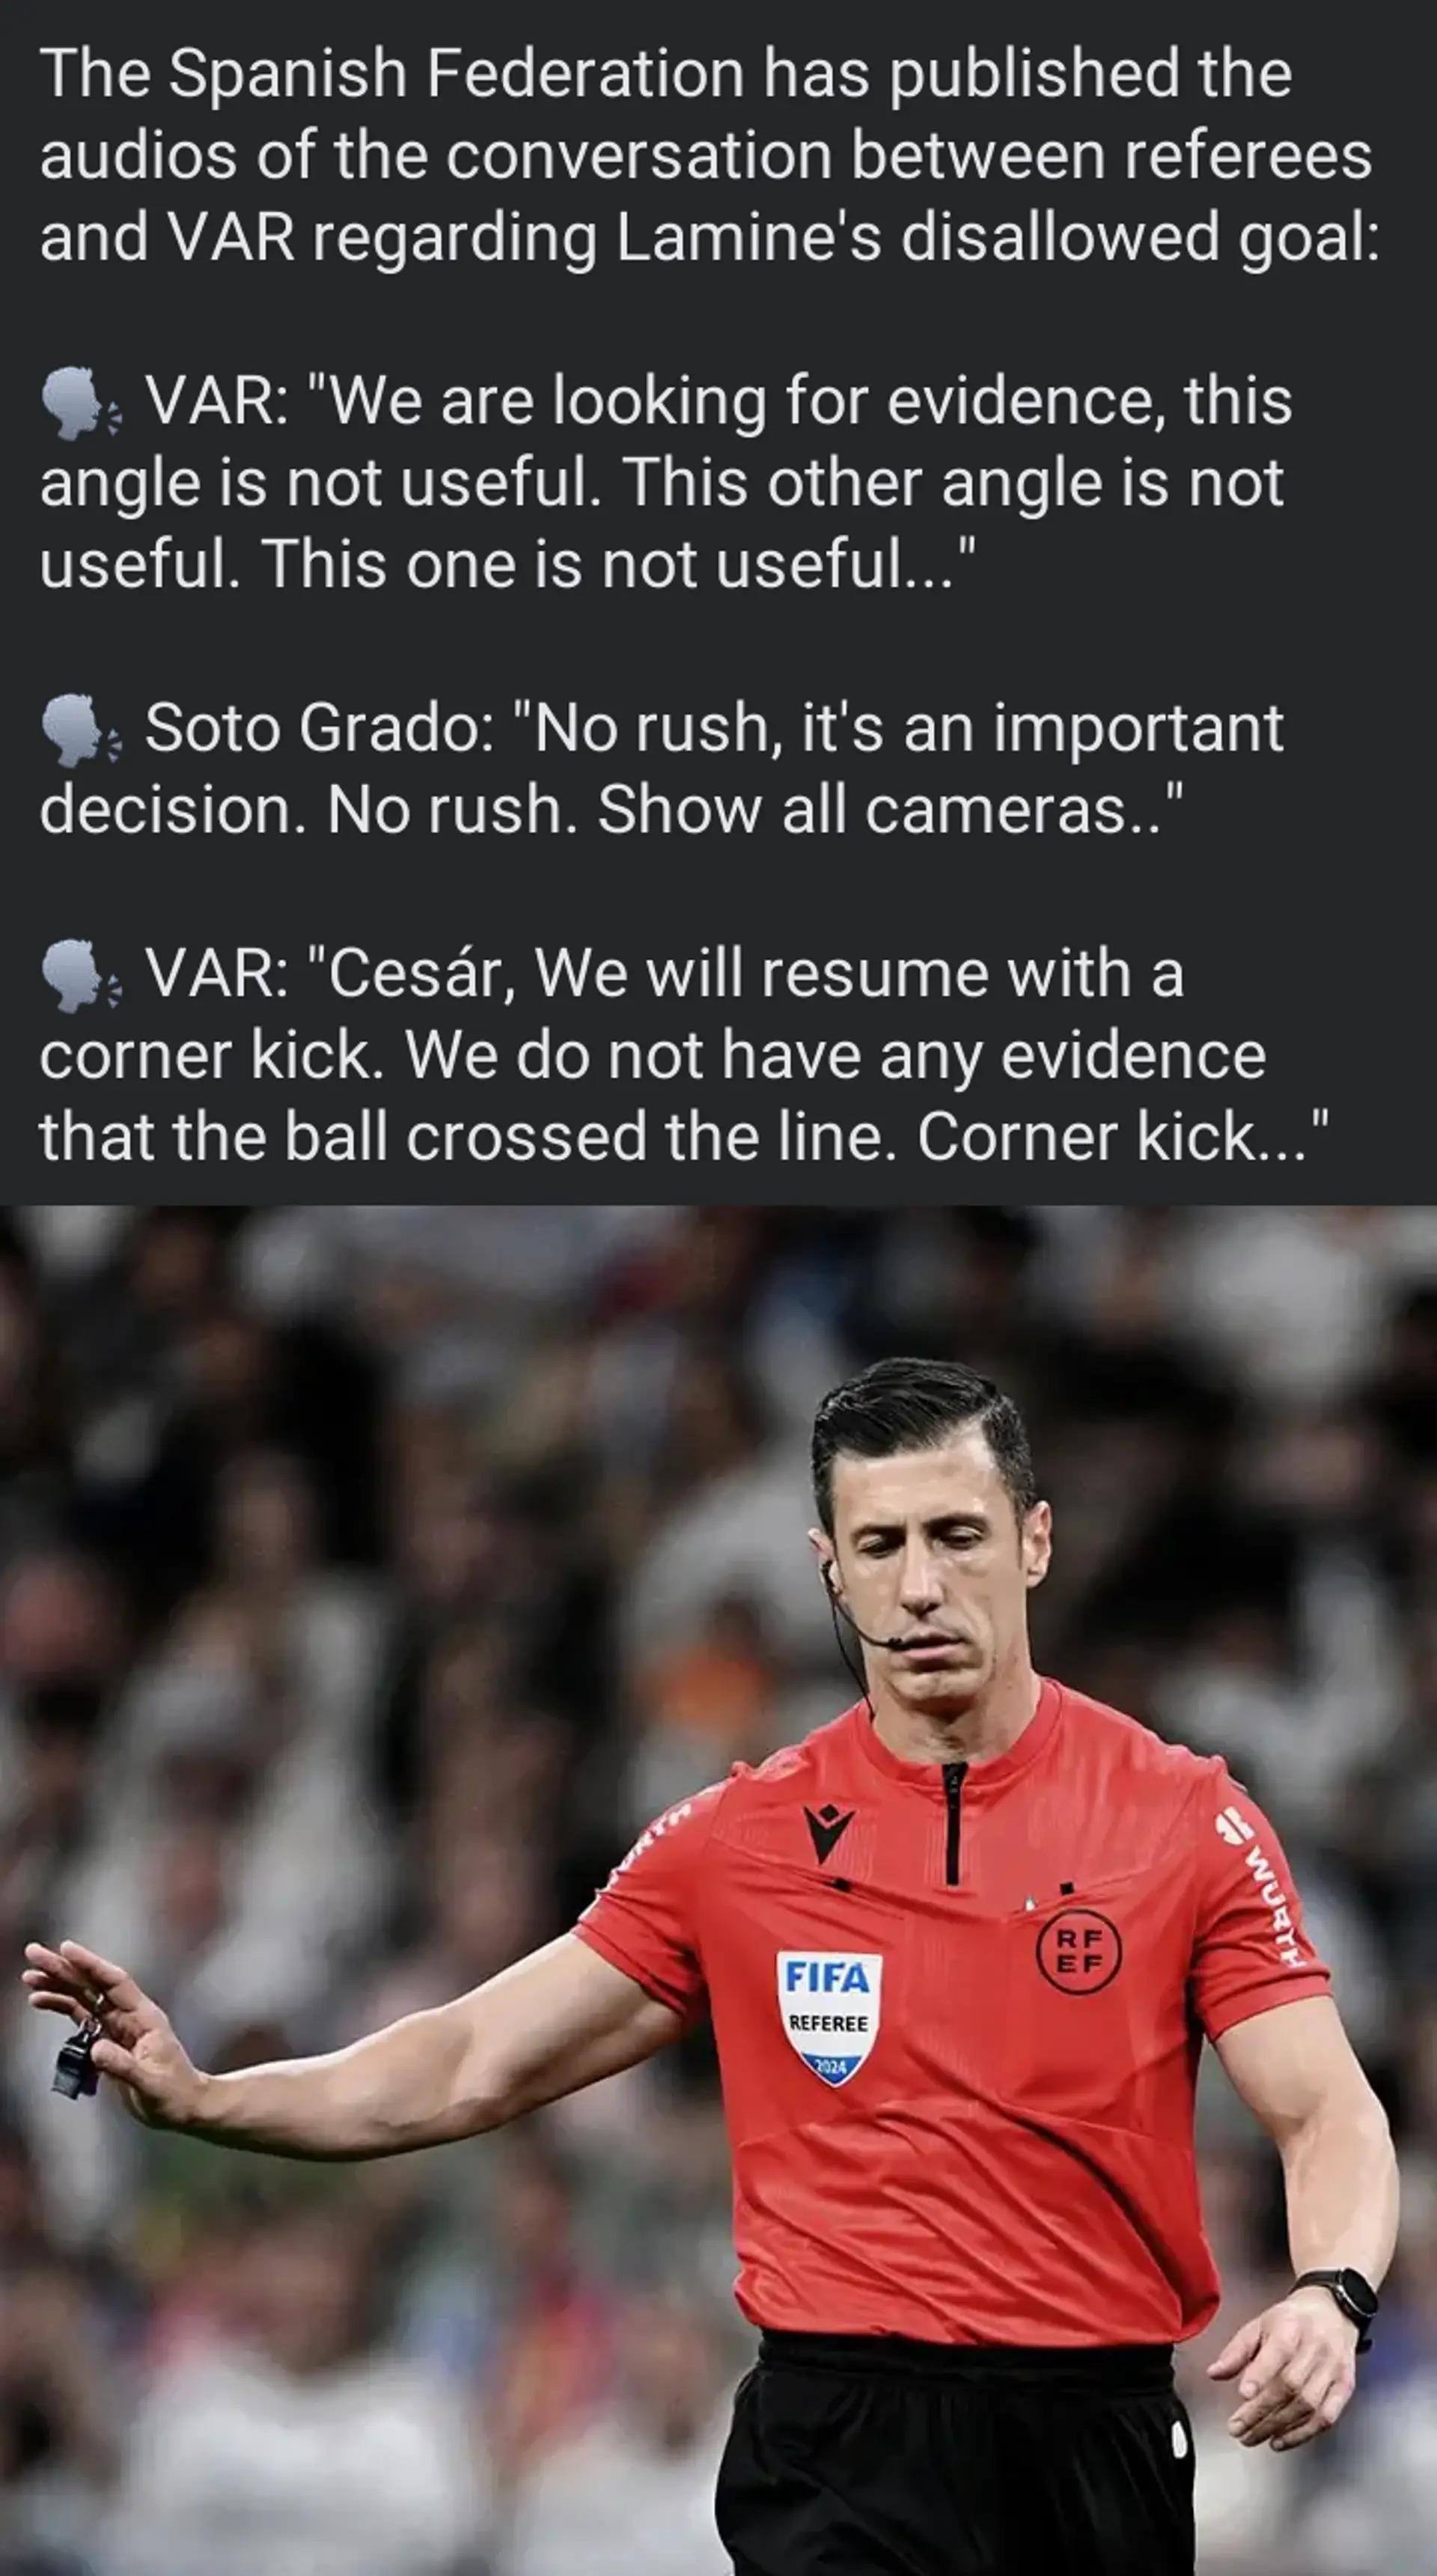 Please read carefully between VAR and referee